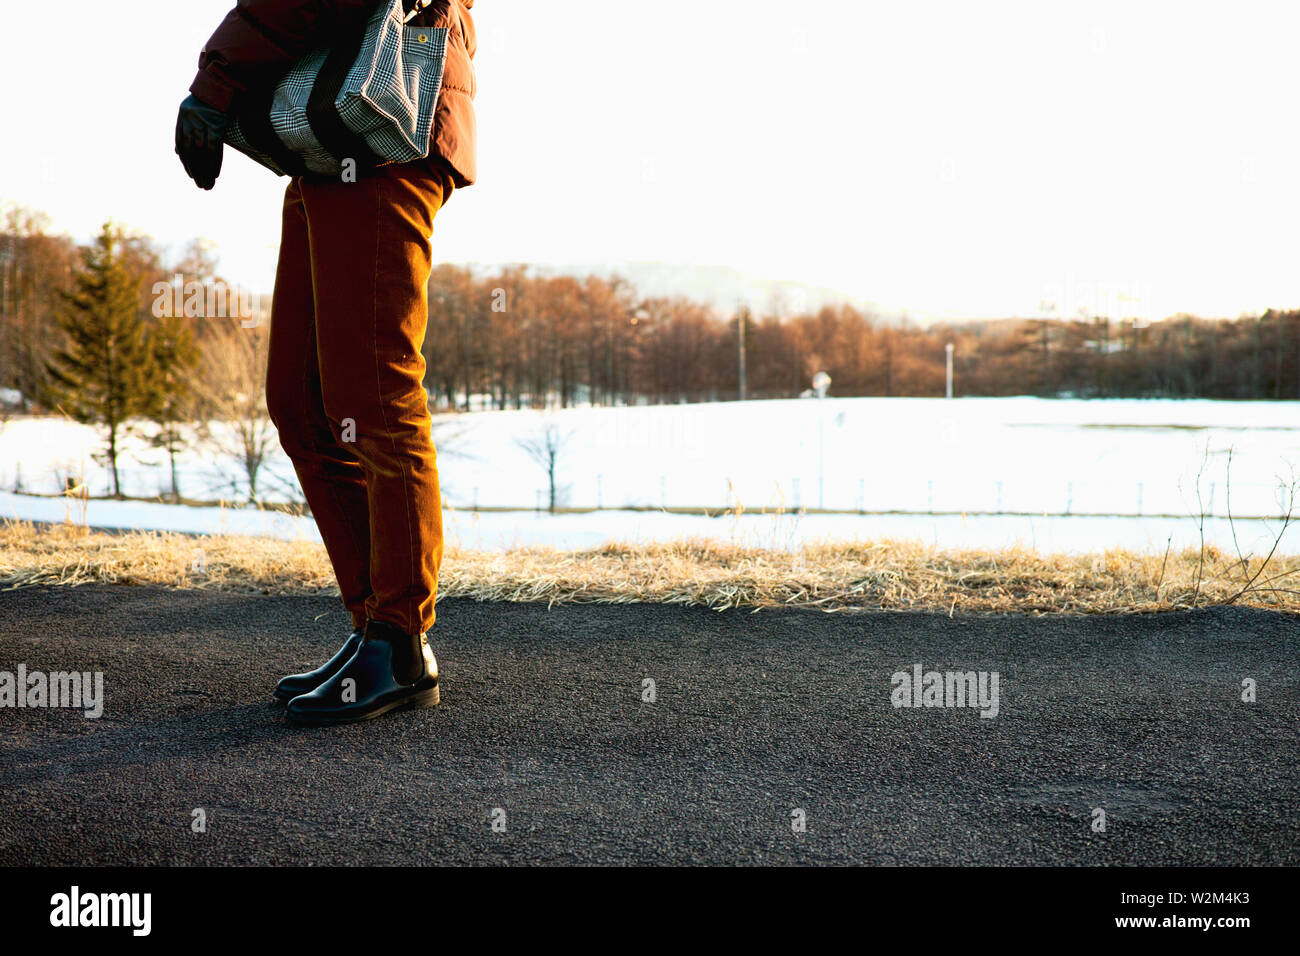 A view of someone's legs as they go walking in the countryside in Winter Stock Photo